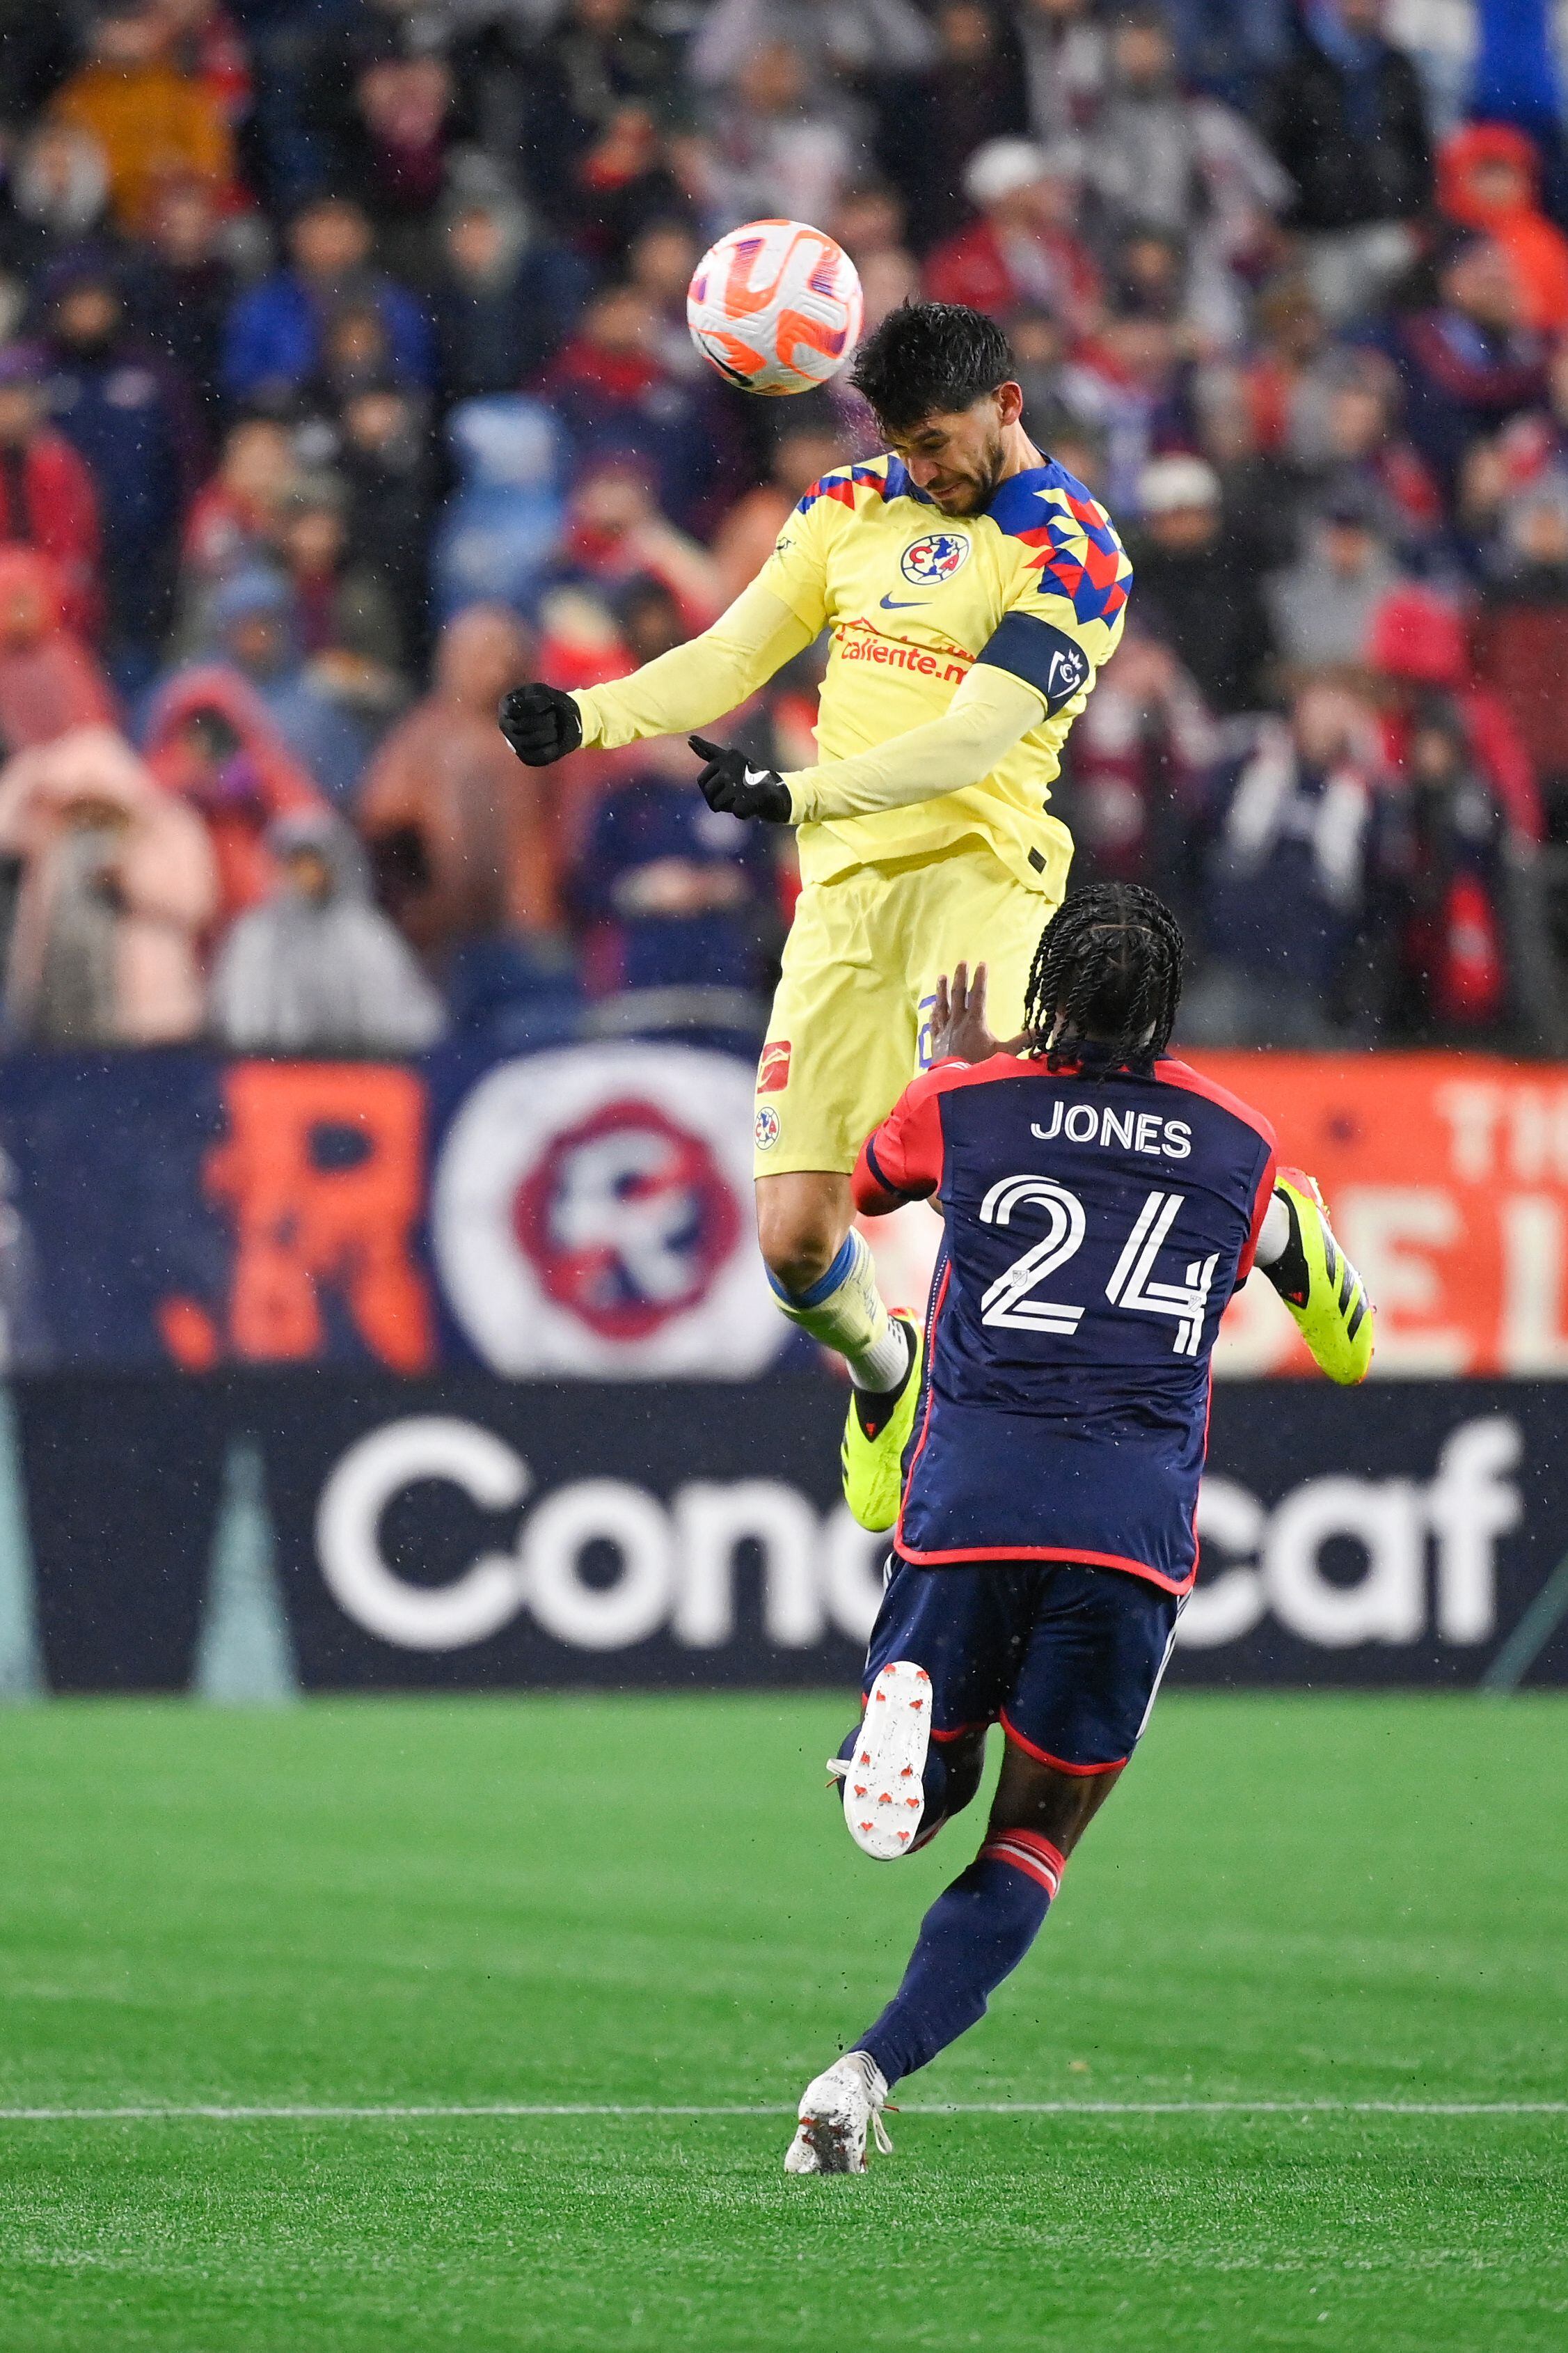 Apr 2, 2024; Foxborough, MA, USA; Club America forward Henry Martin (21) heads the ball  against New England Revolution forward DeJuan Jones (24) during the first half at Gillette Stadium. Mandatory Credit: Eric Canha-USA TODAY Sports